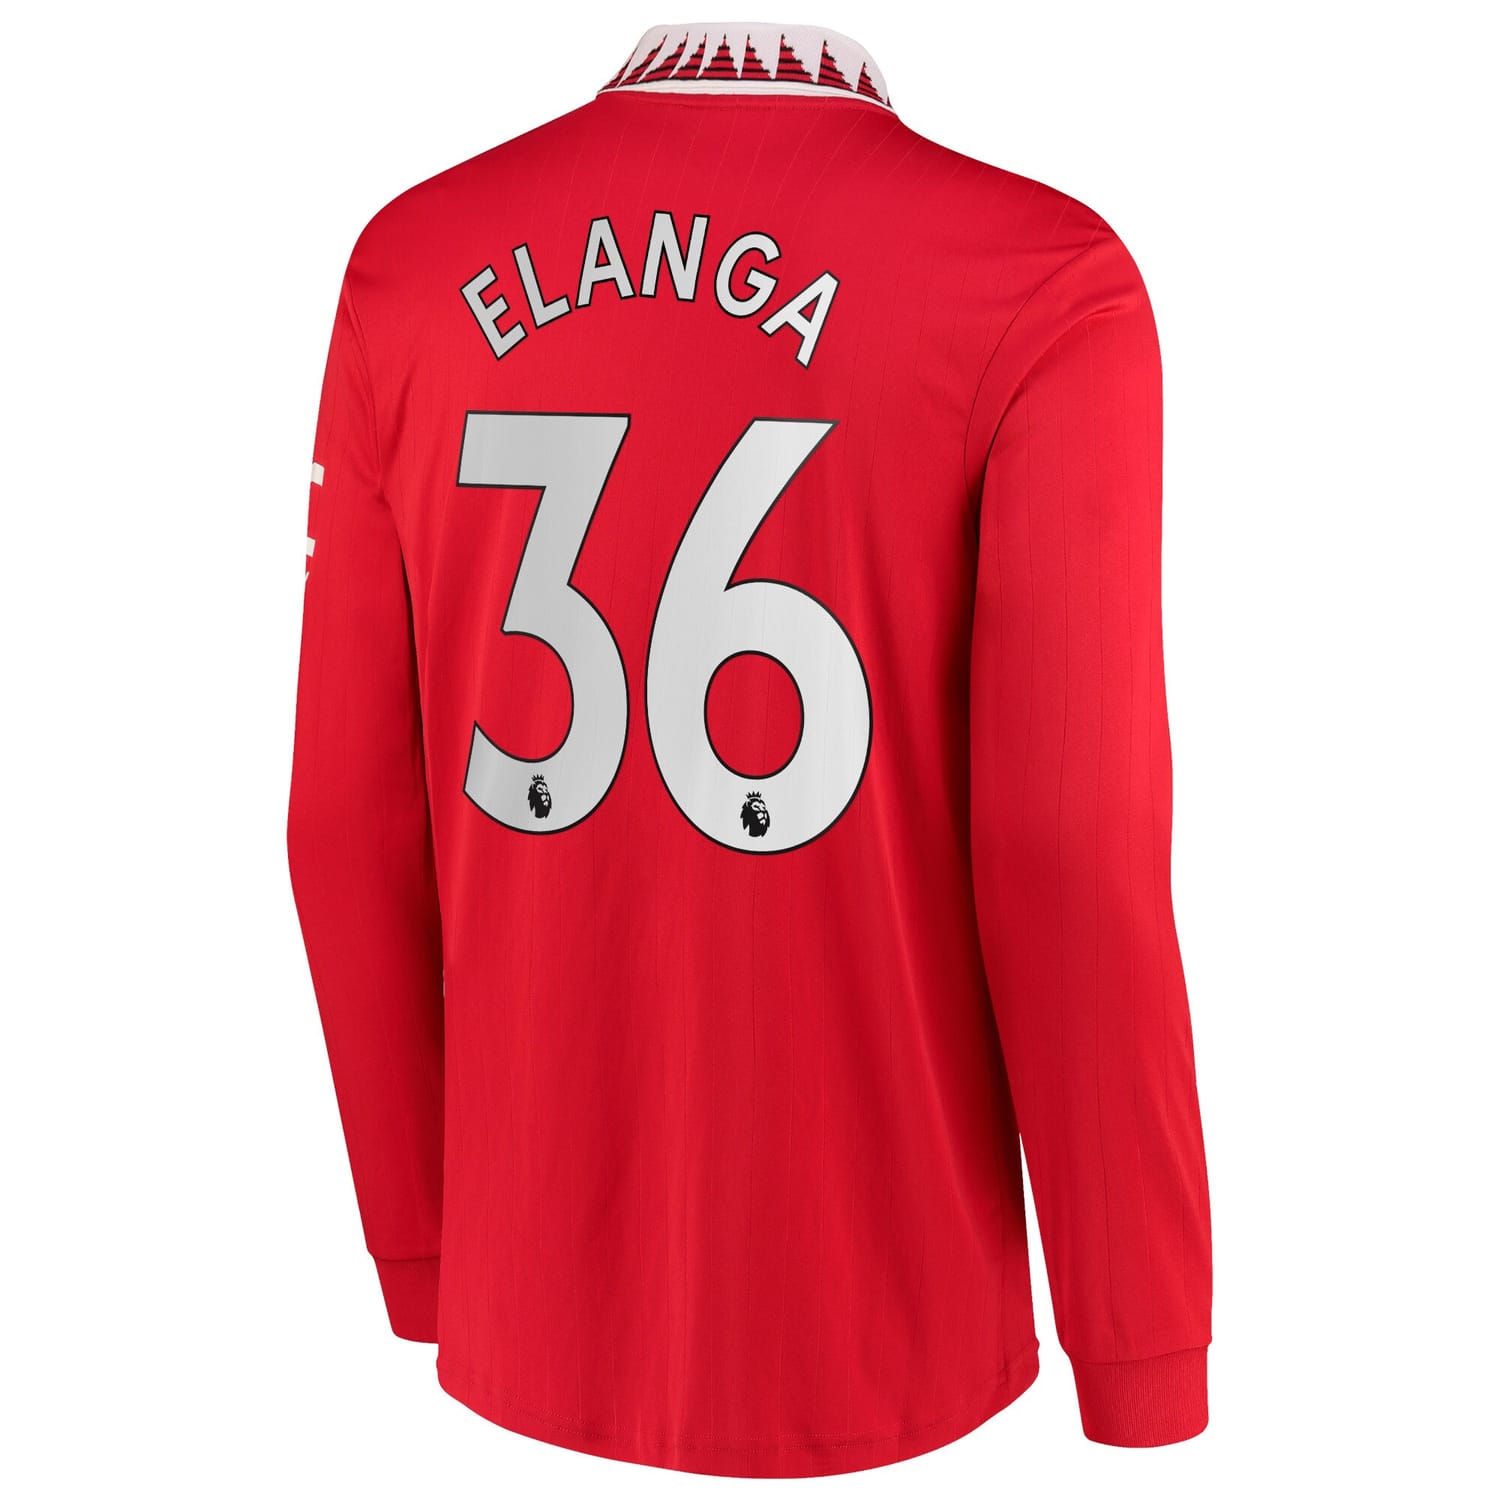 Premier League Manchester United Home Jersey Shirt Long Sleeve 2022-23 player Anthony Elanga 36 printing for Men